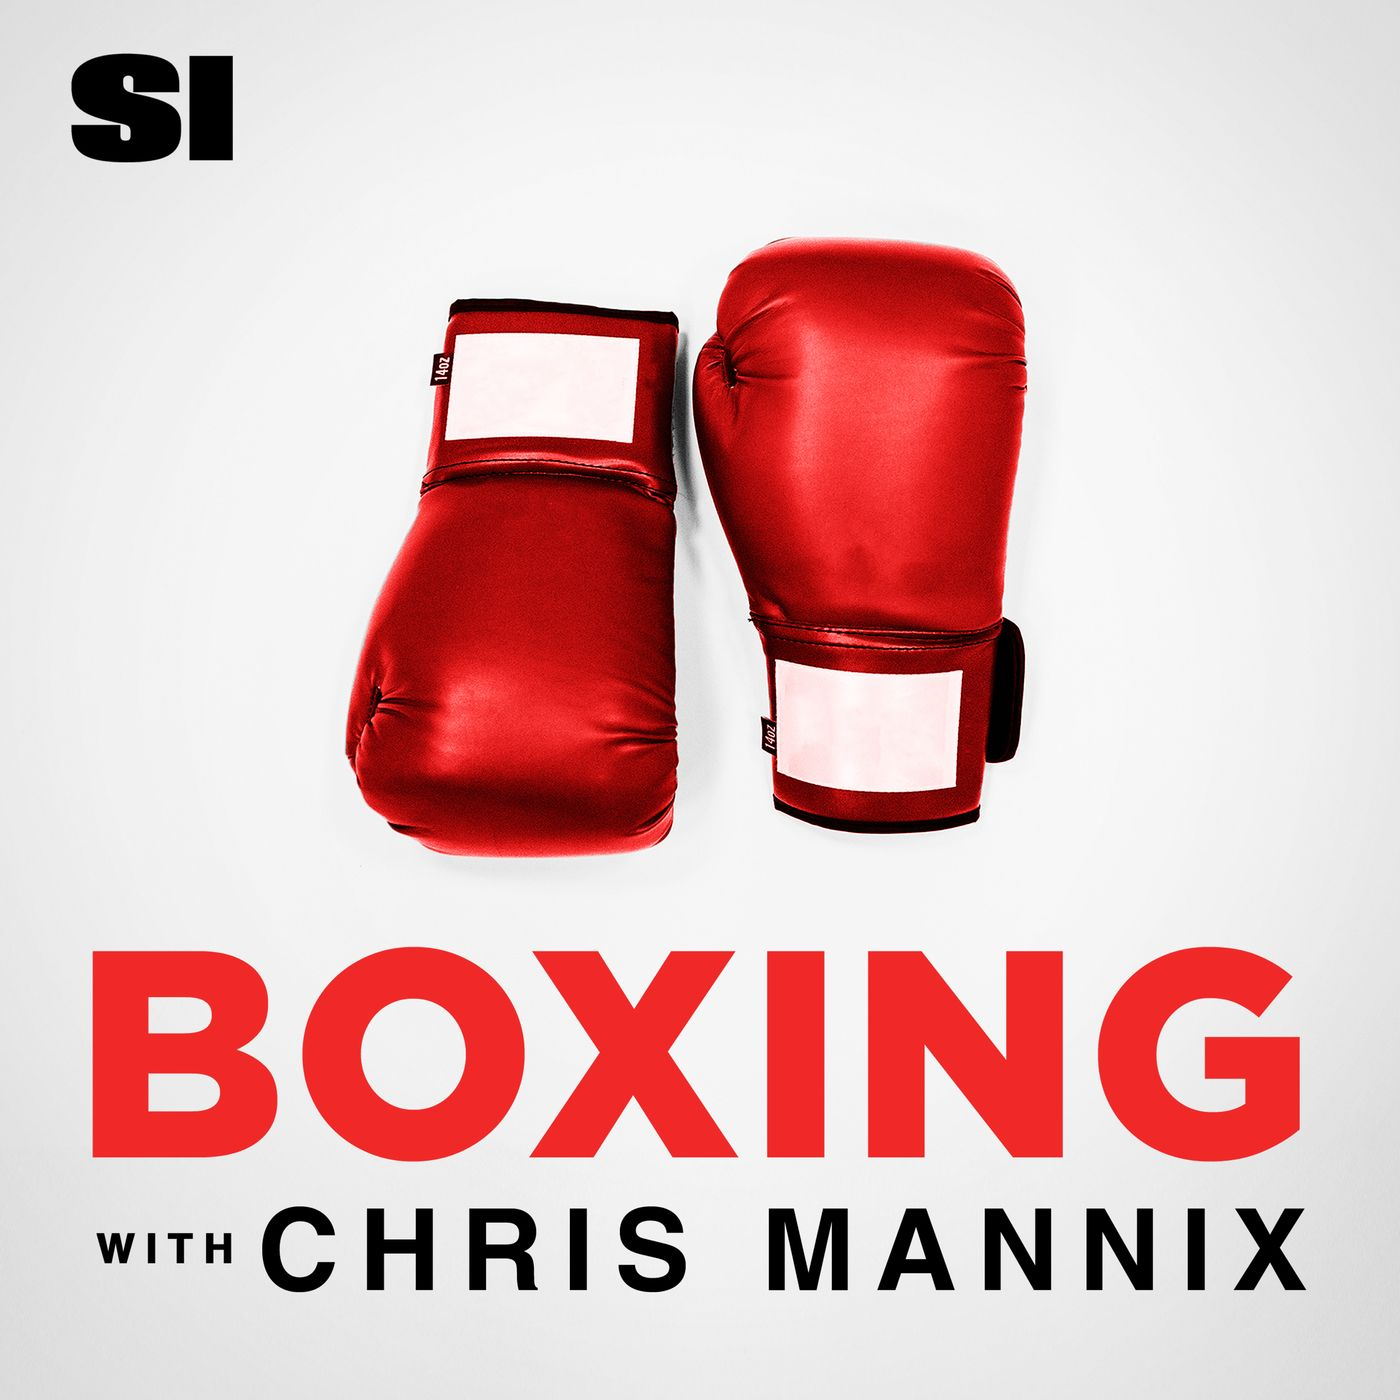 A highlight from Boxing with Chris Mannix - Less Talking, More Fighting